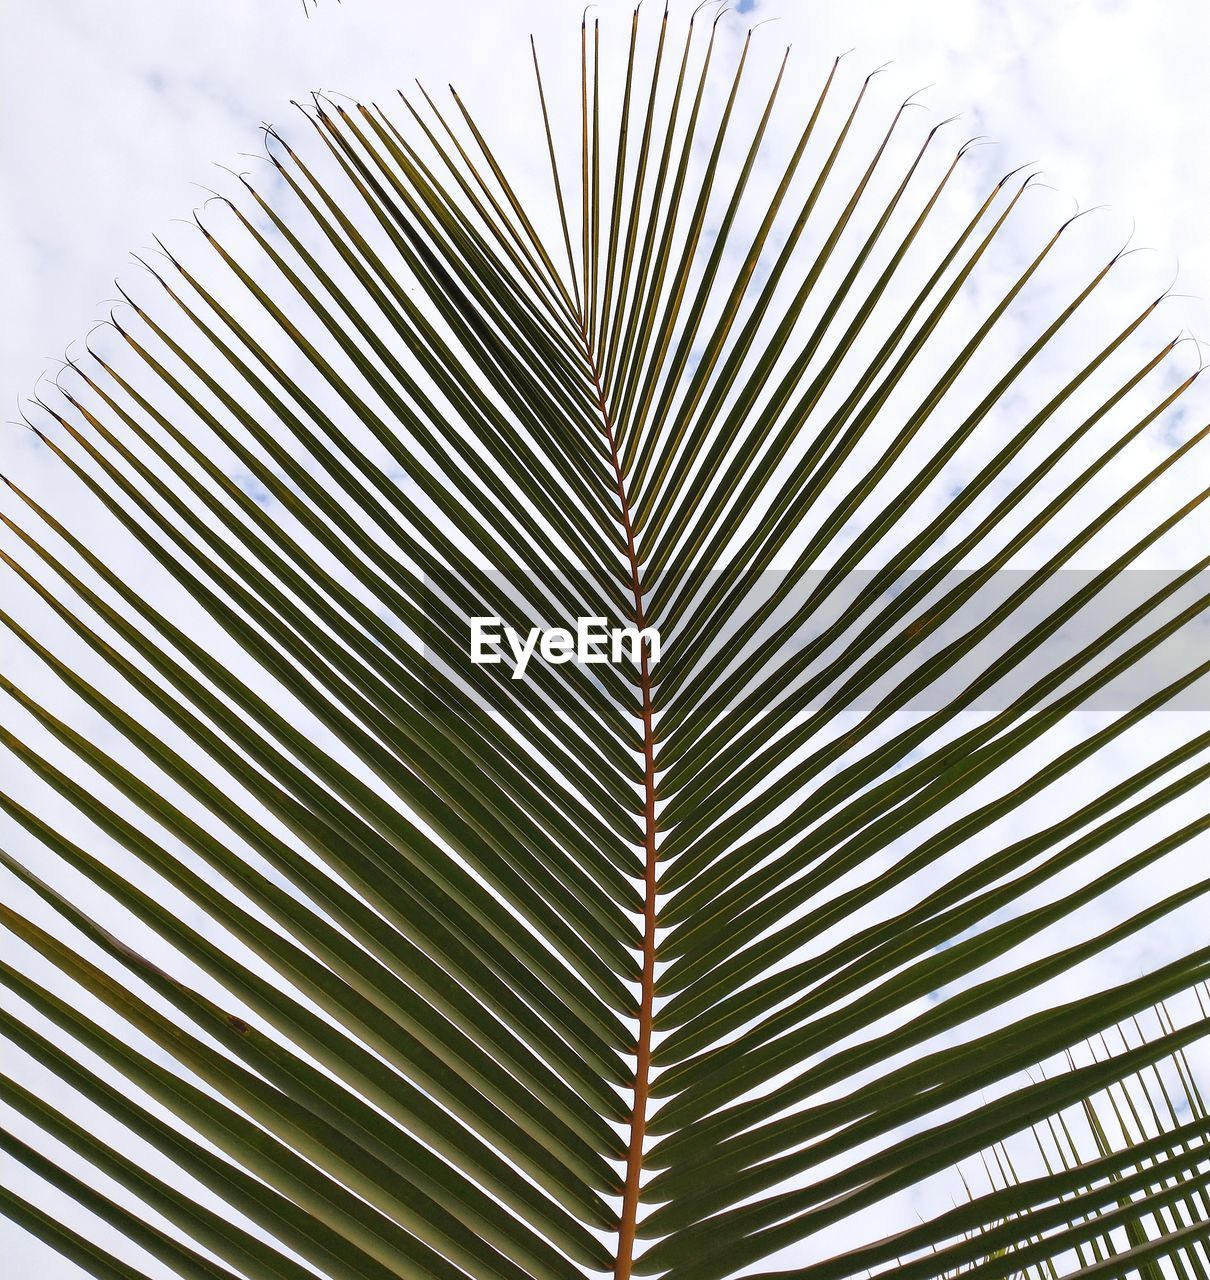 CLOSE-UP OF PALM TREE AGAINST SKY